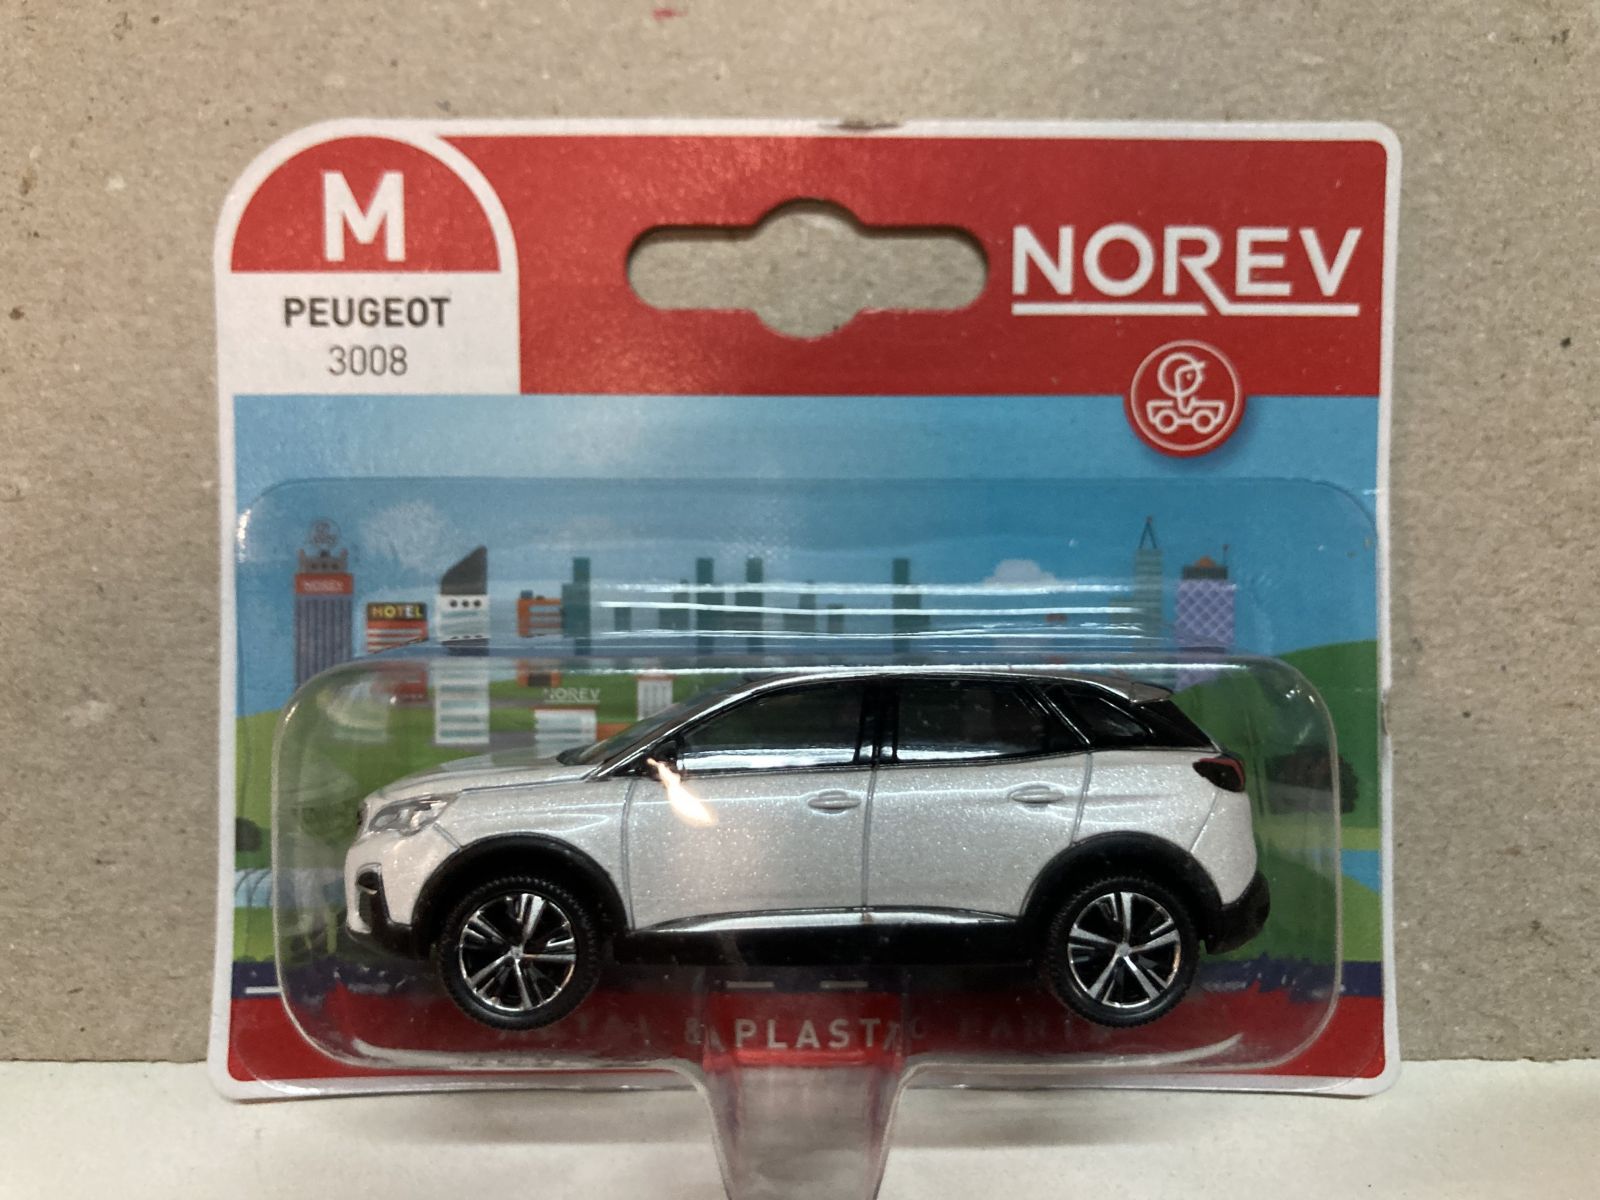 3 different colors to choose Norev 3 inches peugeot 3008 1/64 